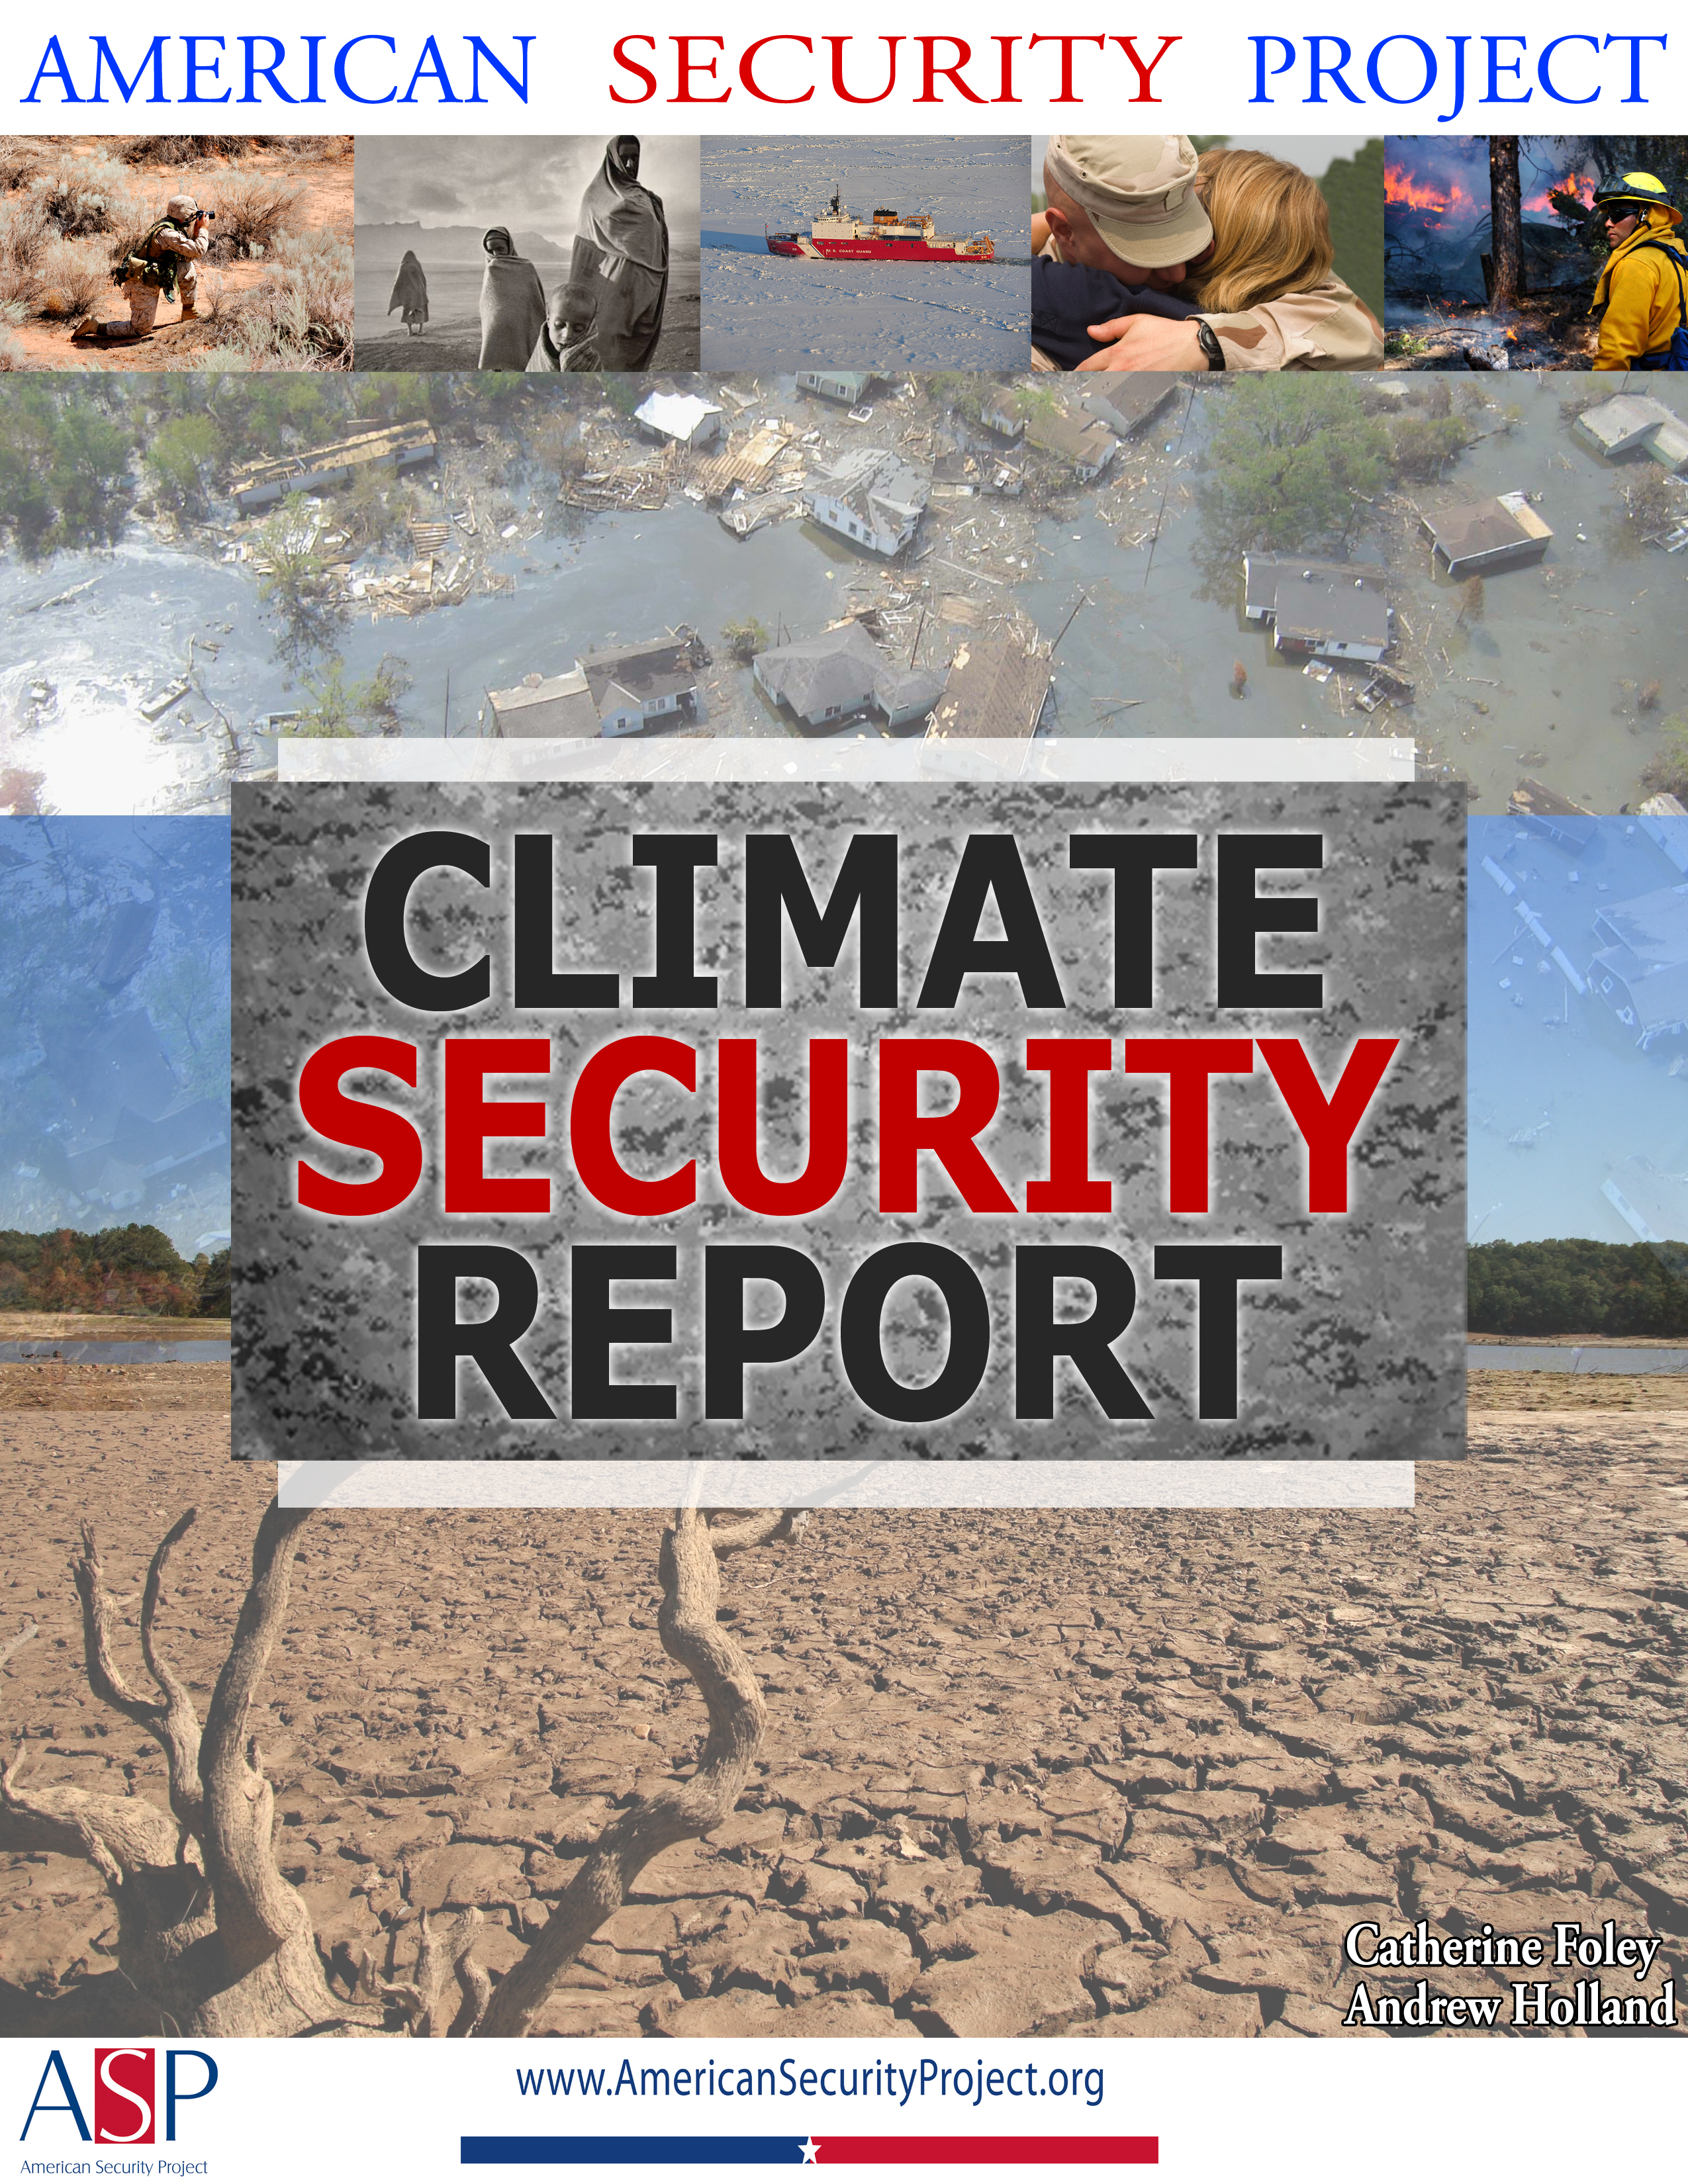 CSR PART TWO:  CLIMATE CHANGE & GLOBAL SECURITY